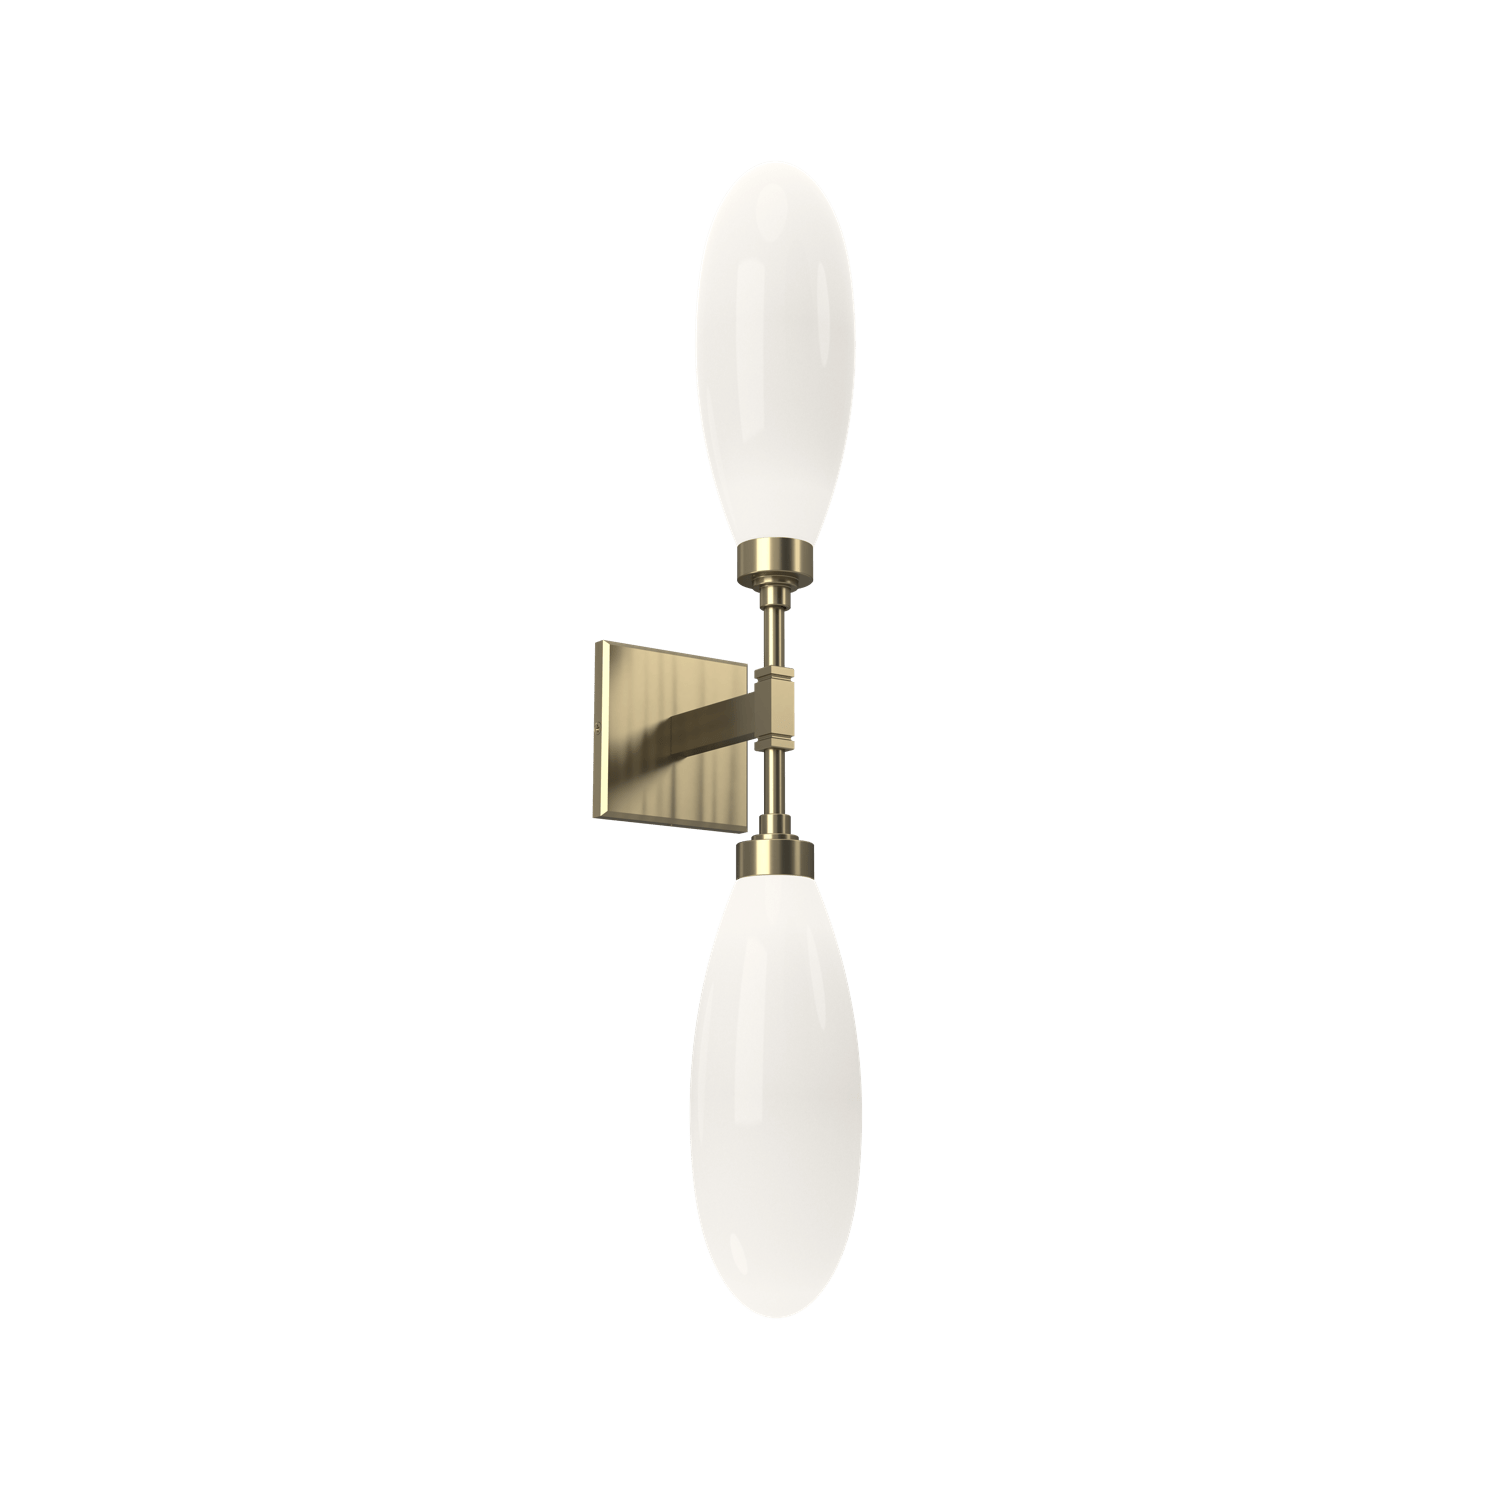 IDB0071-02-HB-WL-LL-Hammerton-Studio-Fiori-double-wall-sconce-with-heritage-brass-finish-and-opal-white-glass-shades-and-LED-lamping